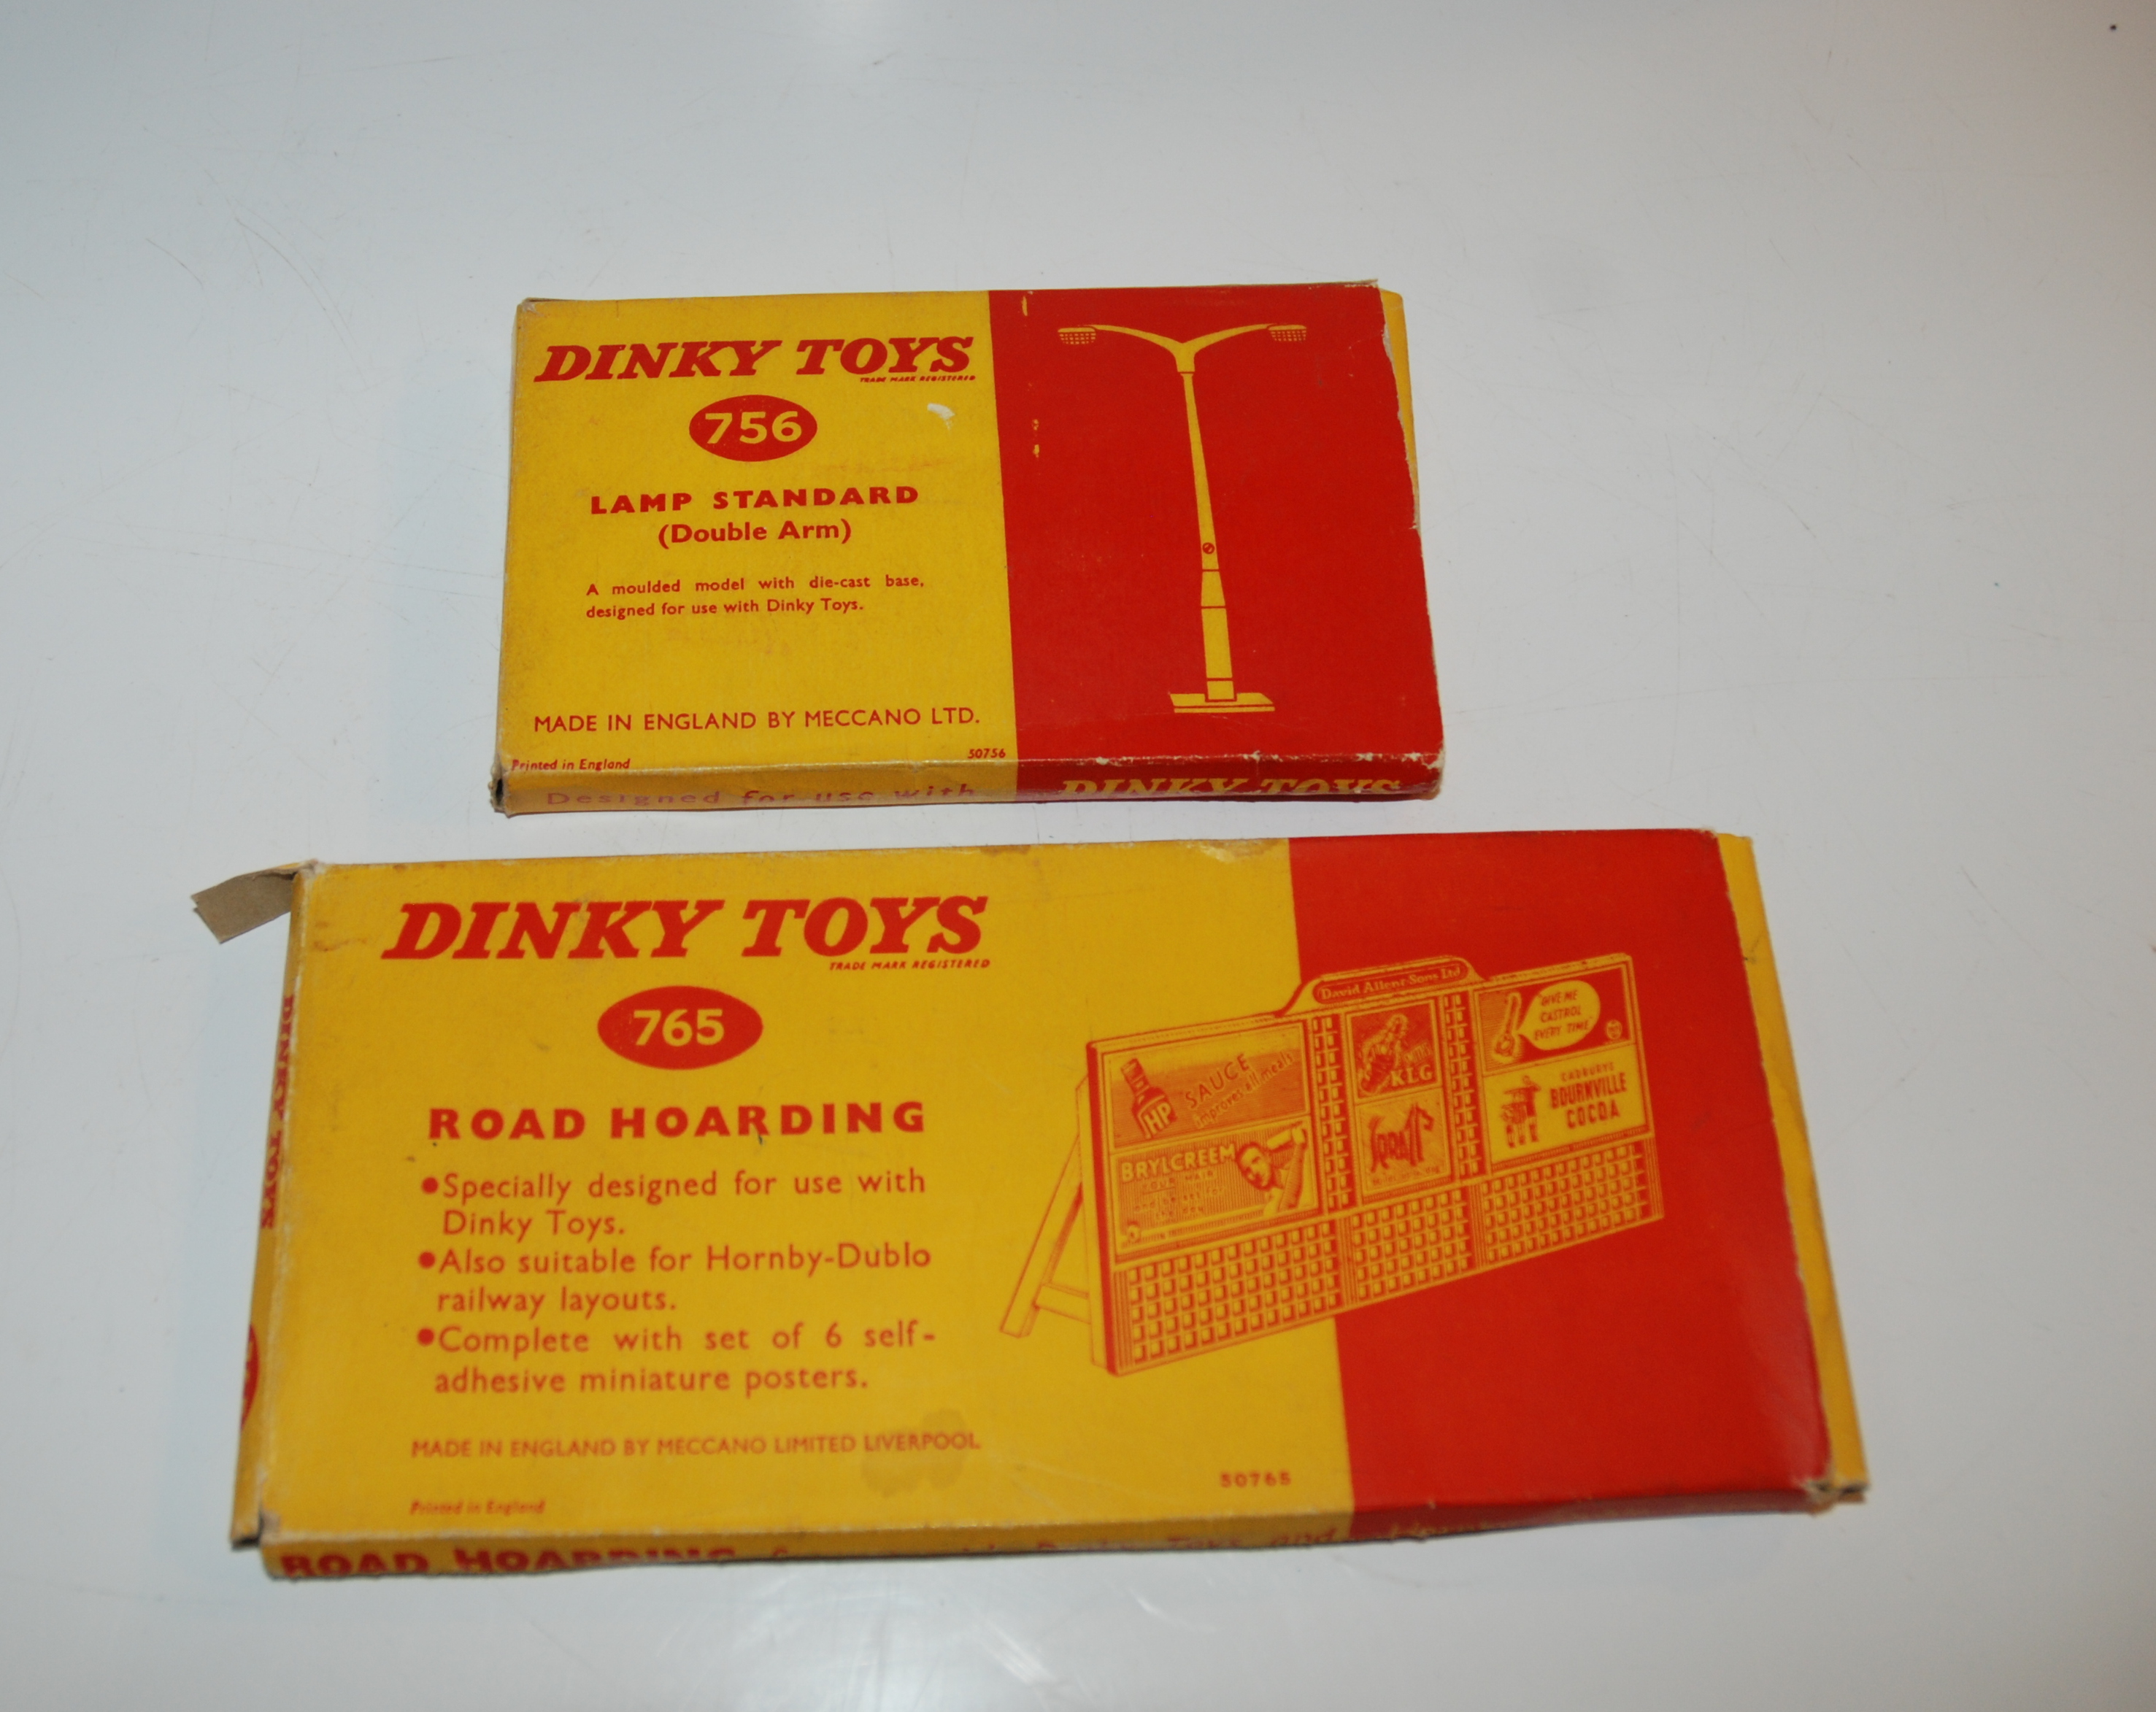 A Dinky Toys 765 Road Hoarding, 756 Lamp Standard and a box of various replica Dinky models